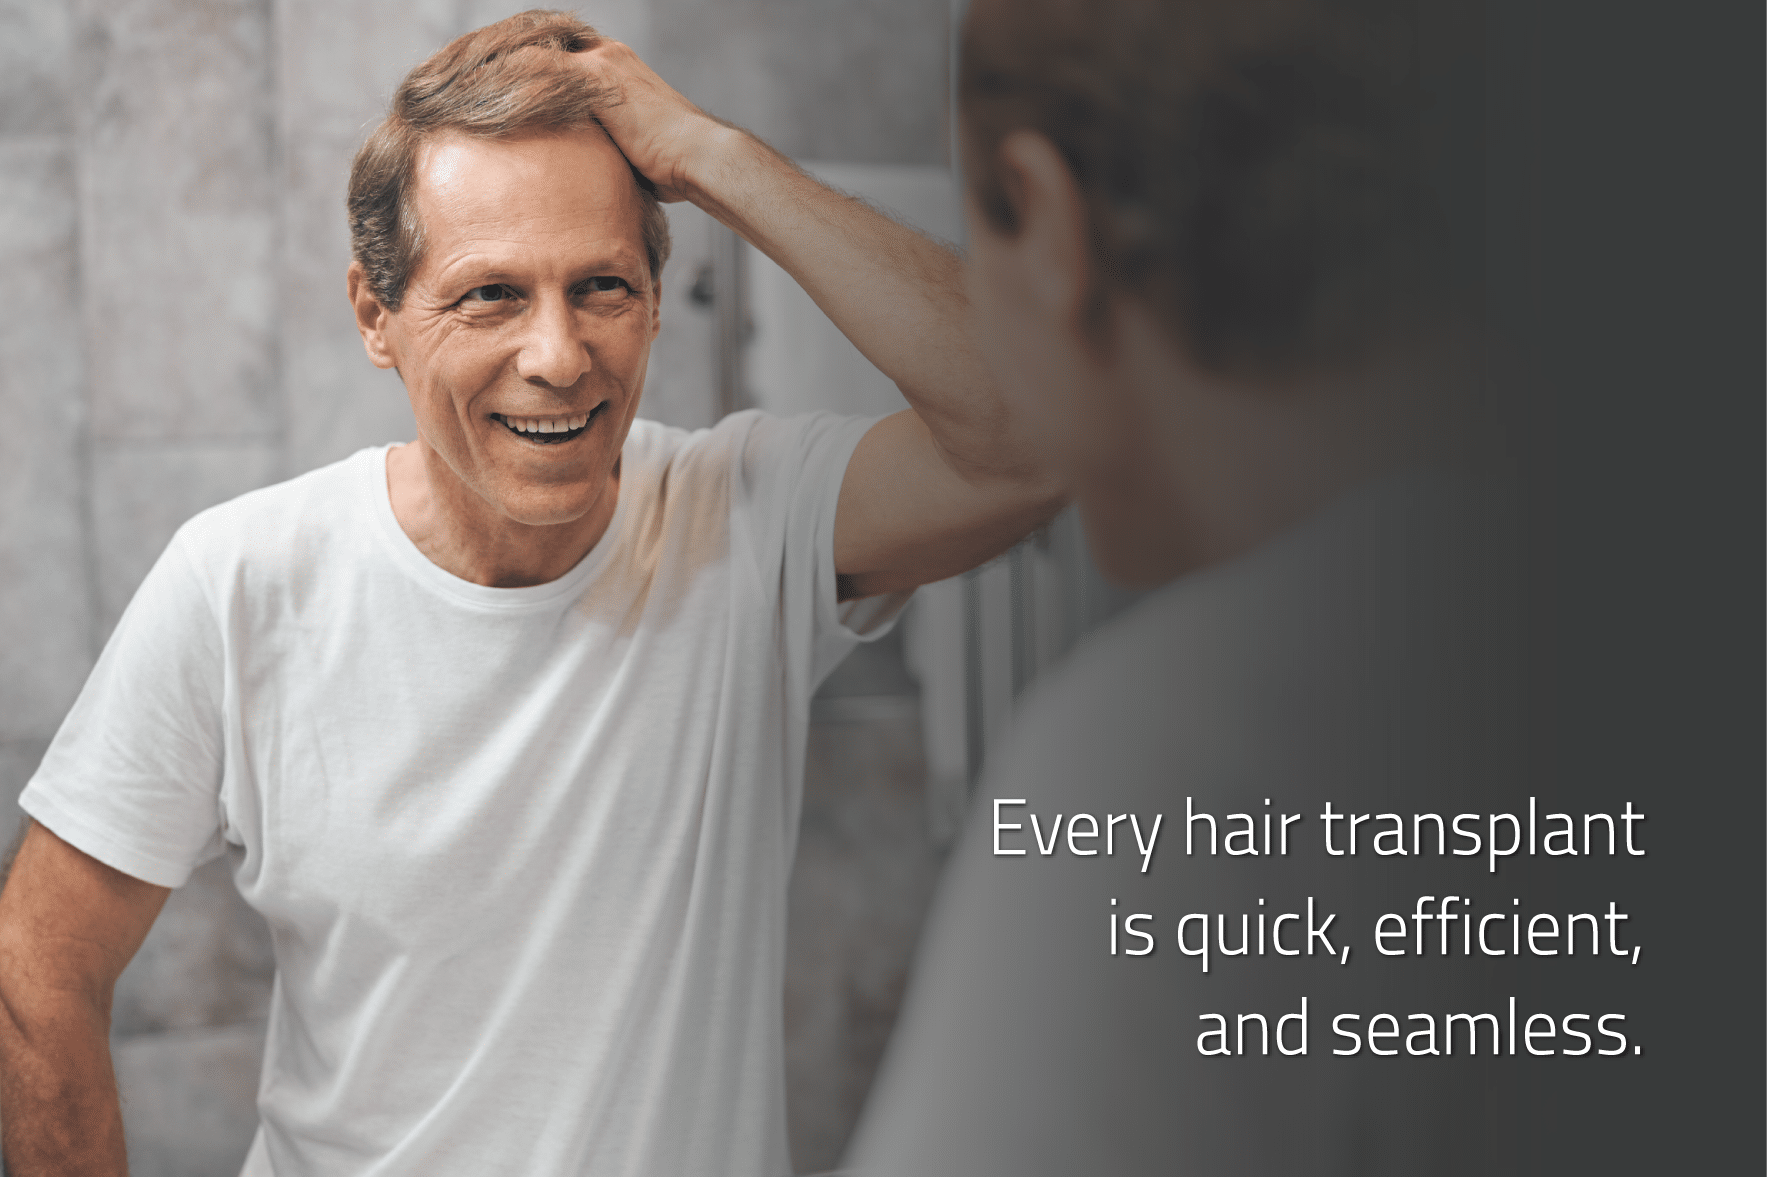 make every hair transplant as quick, efficient, and seamless